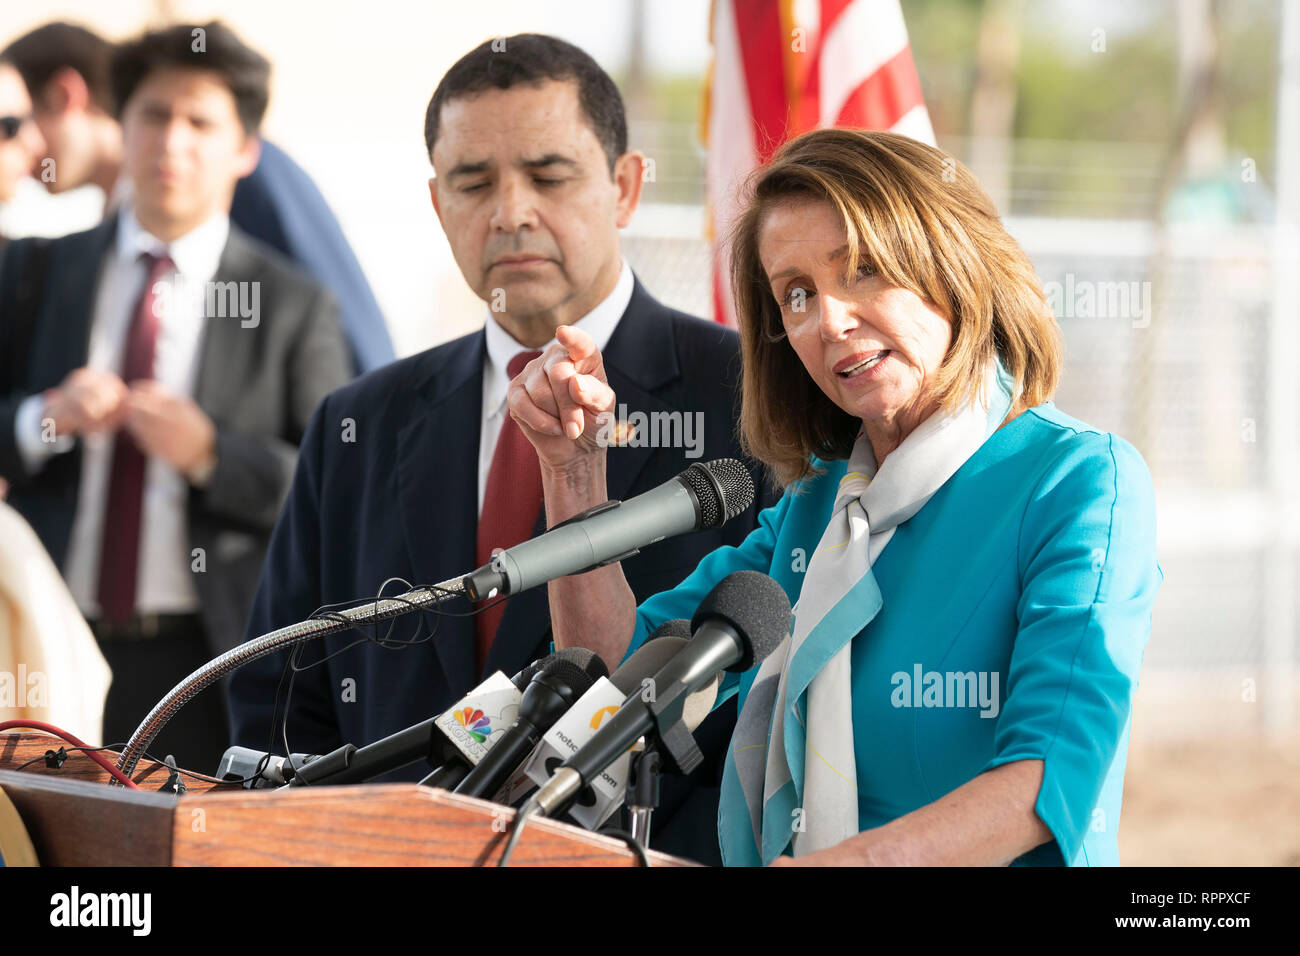 United States House of Representatives Speaker Nancy Pelosi (D-CA), with U.S. Rep. Henry Cuellar (D-Laredo), left, speaks at a press conference at Port of Entry #2 in Laredo, Texas, after touring the Texas-Mexico border between Laredo and Nuevo Laredo, Tamaulipas, Mexico. Stock Photo